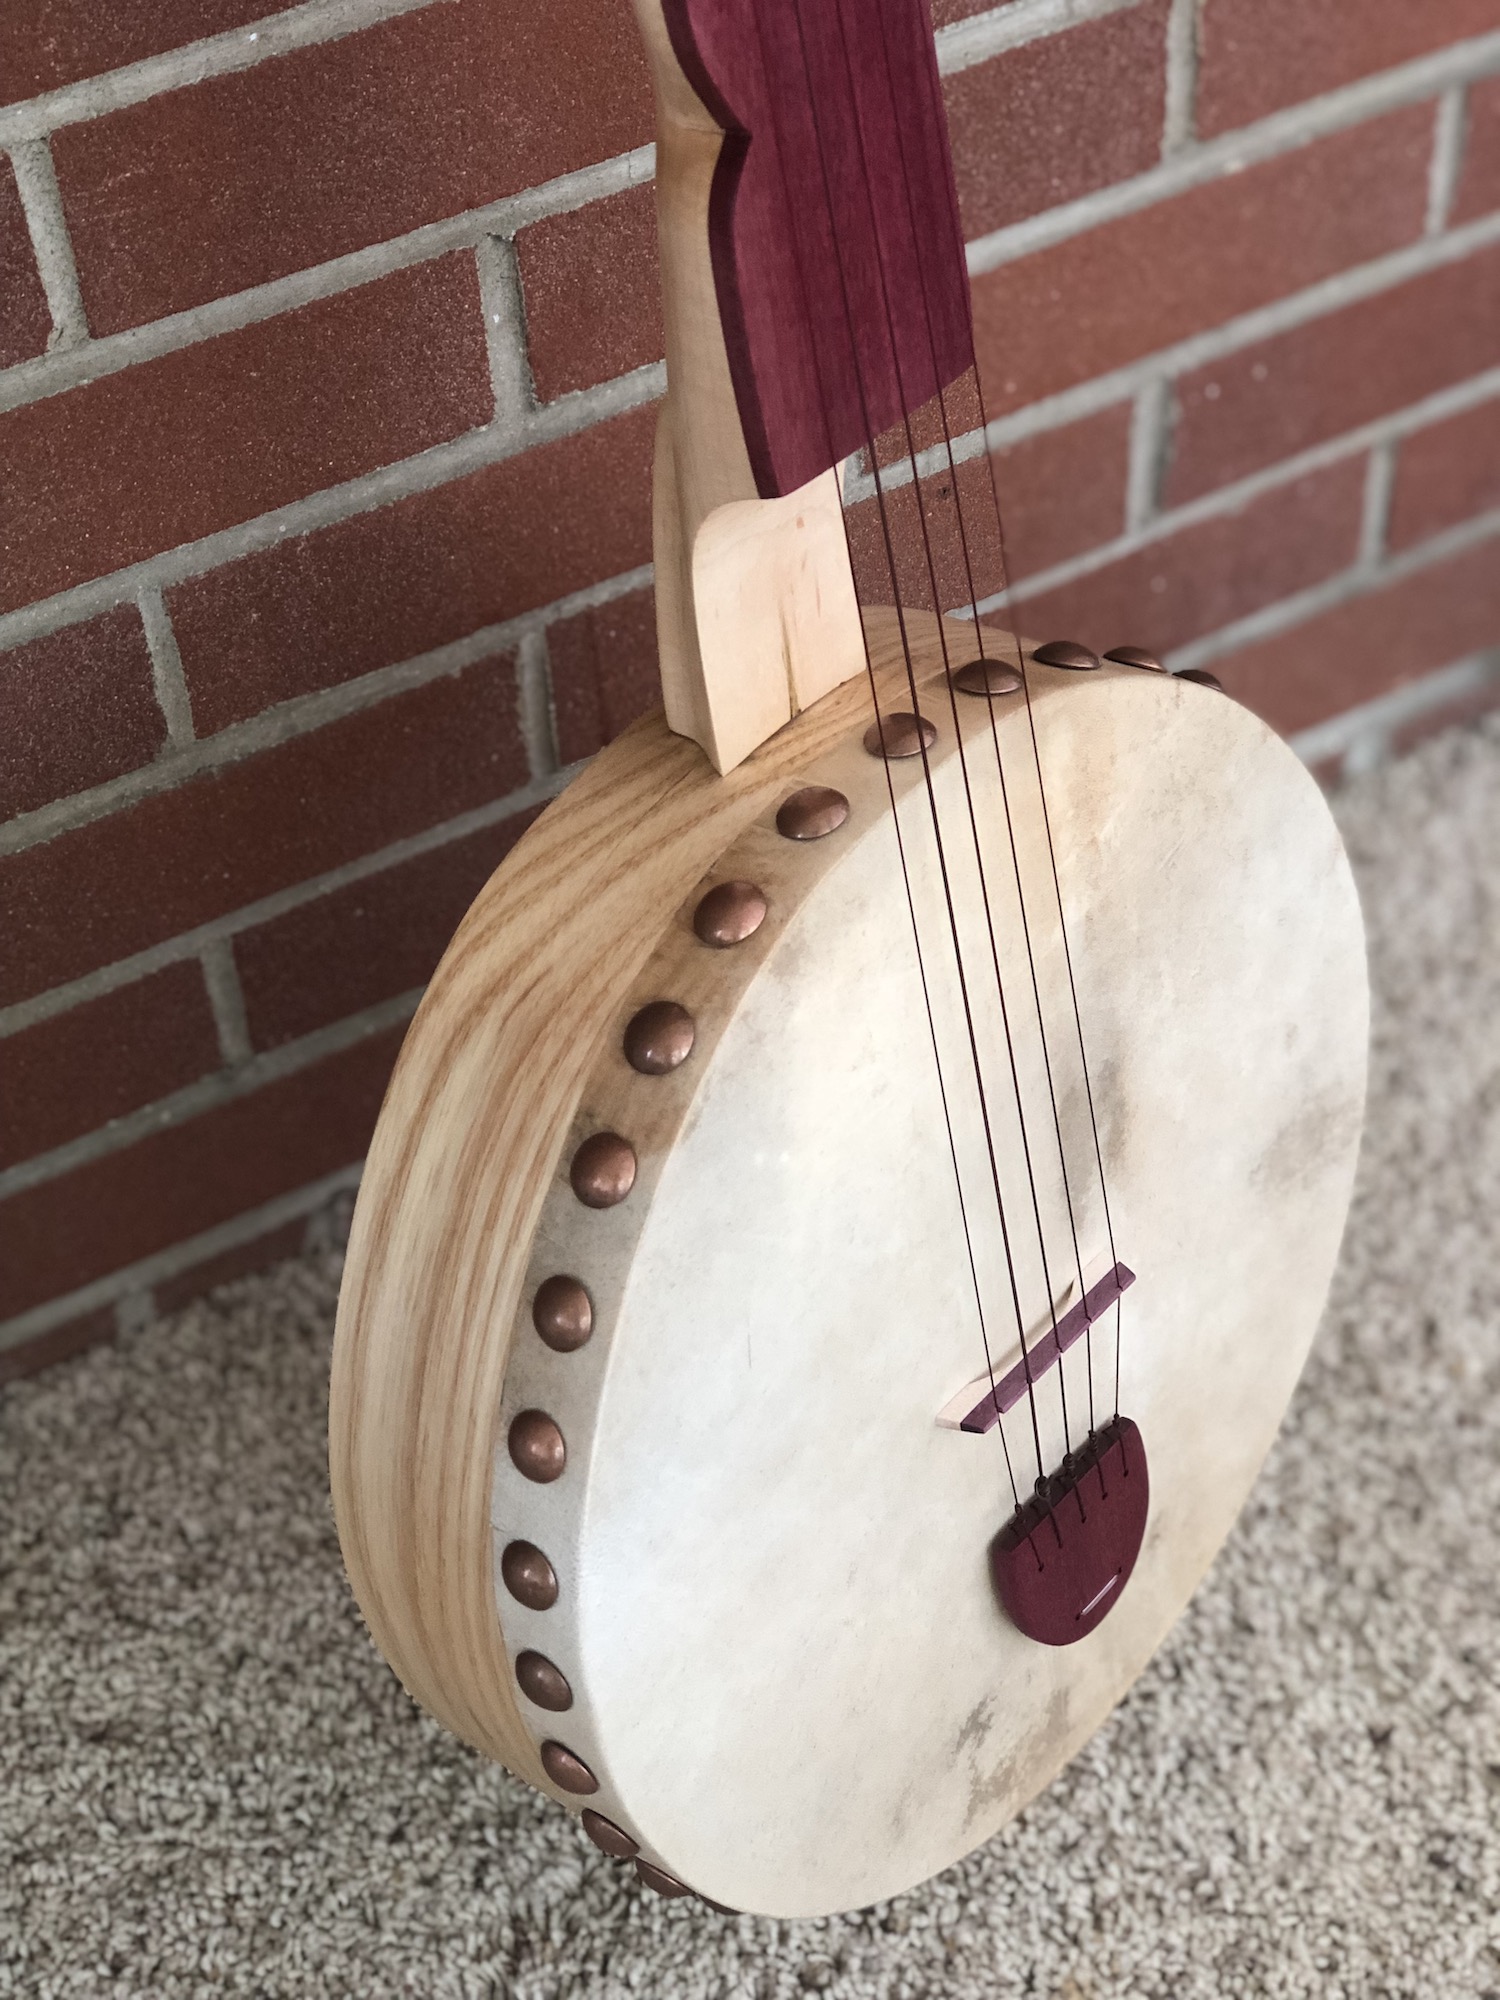 Maple and purpleheart body